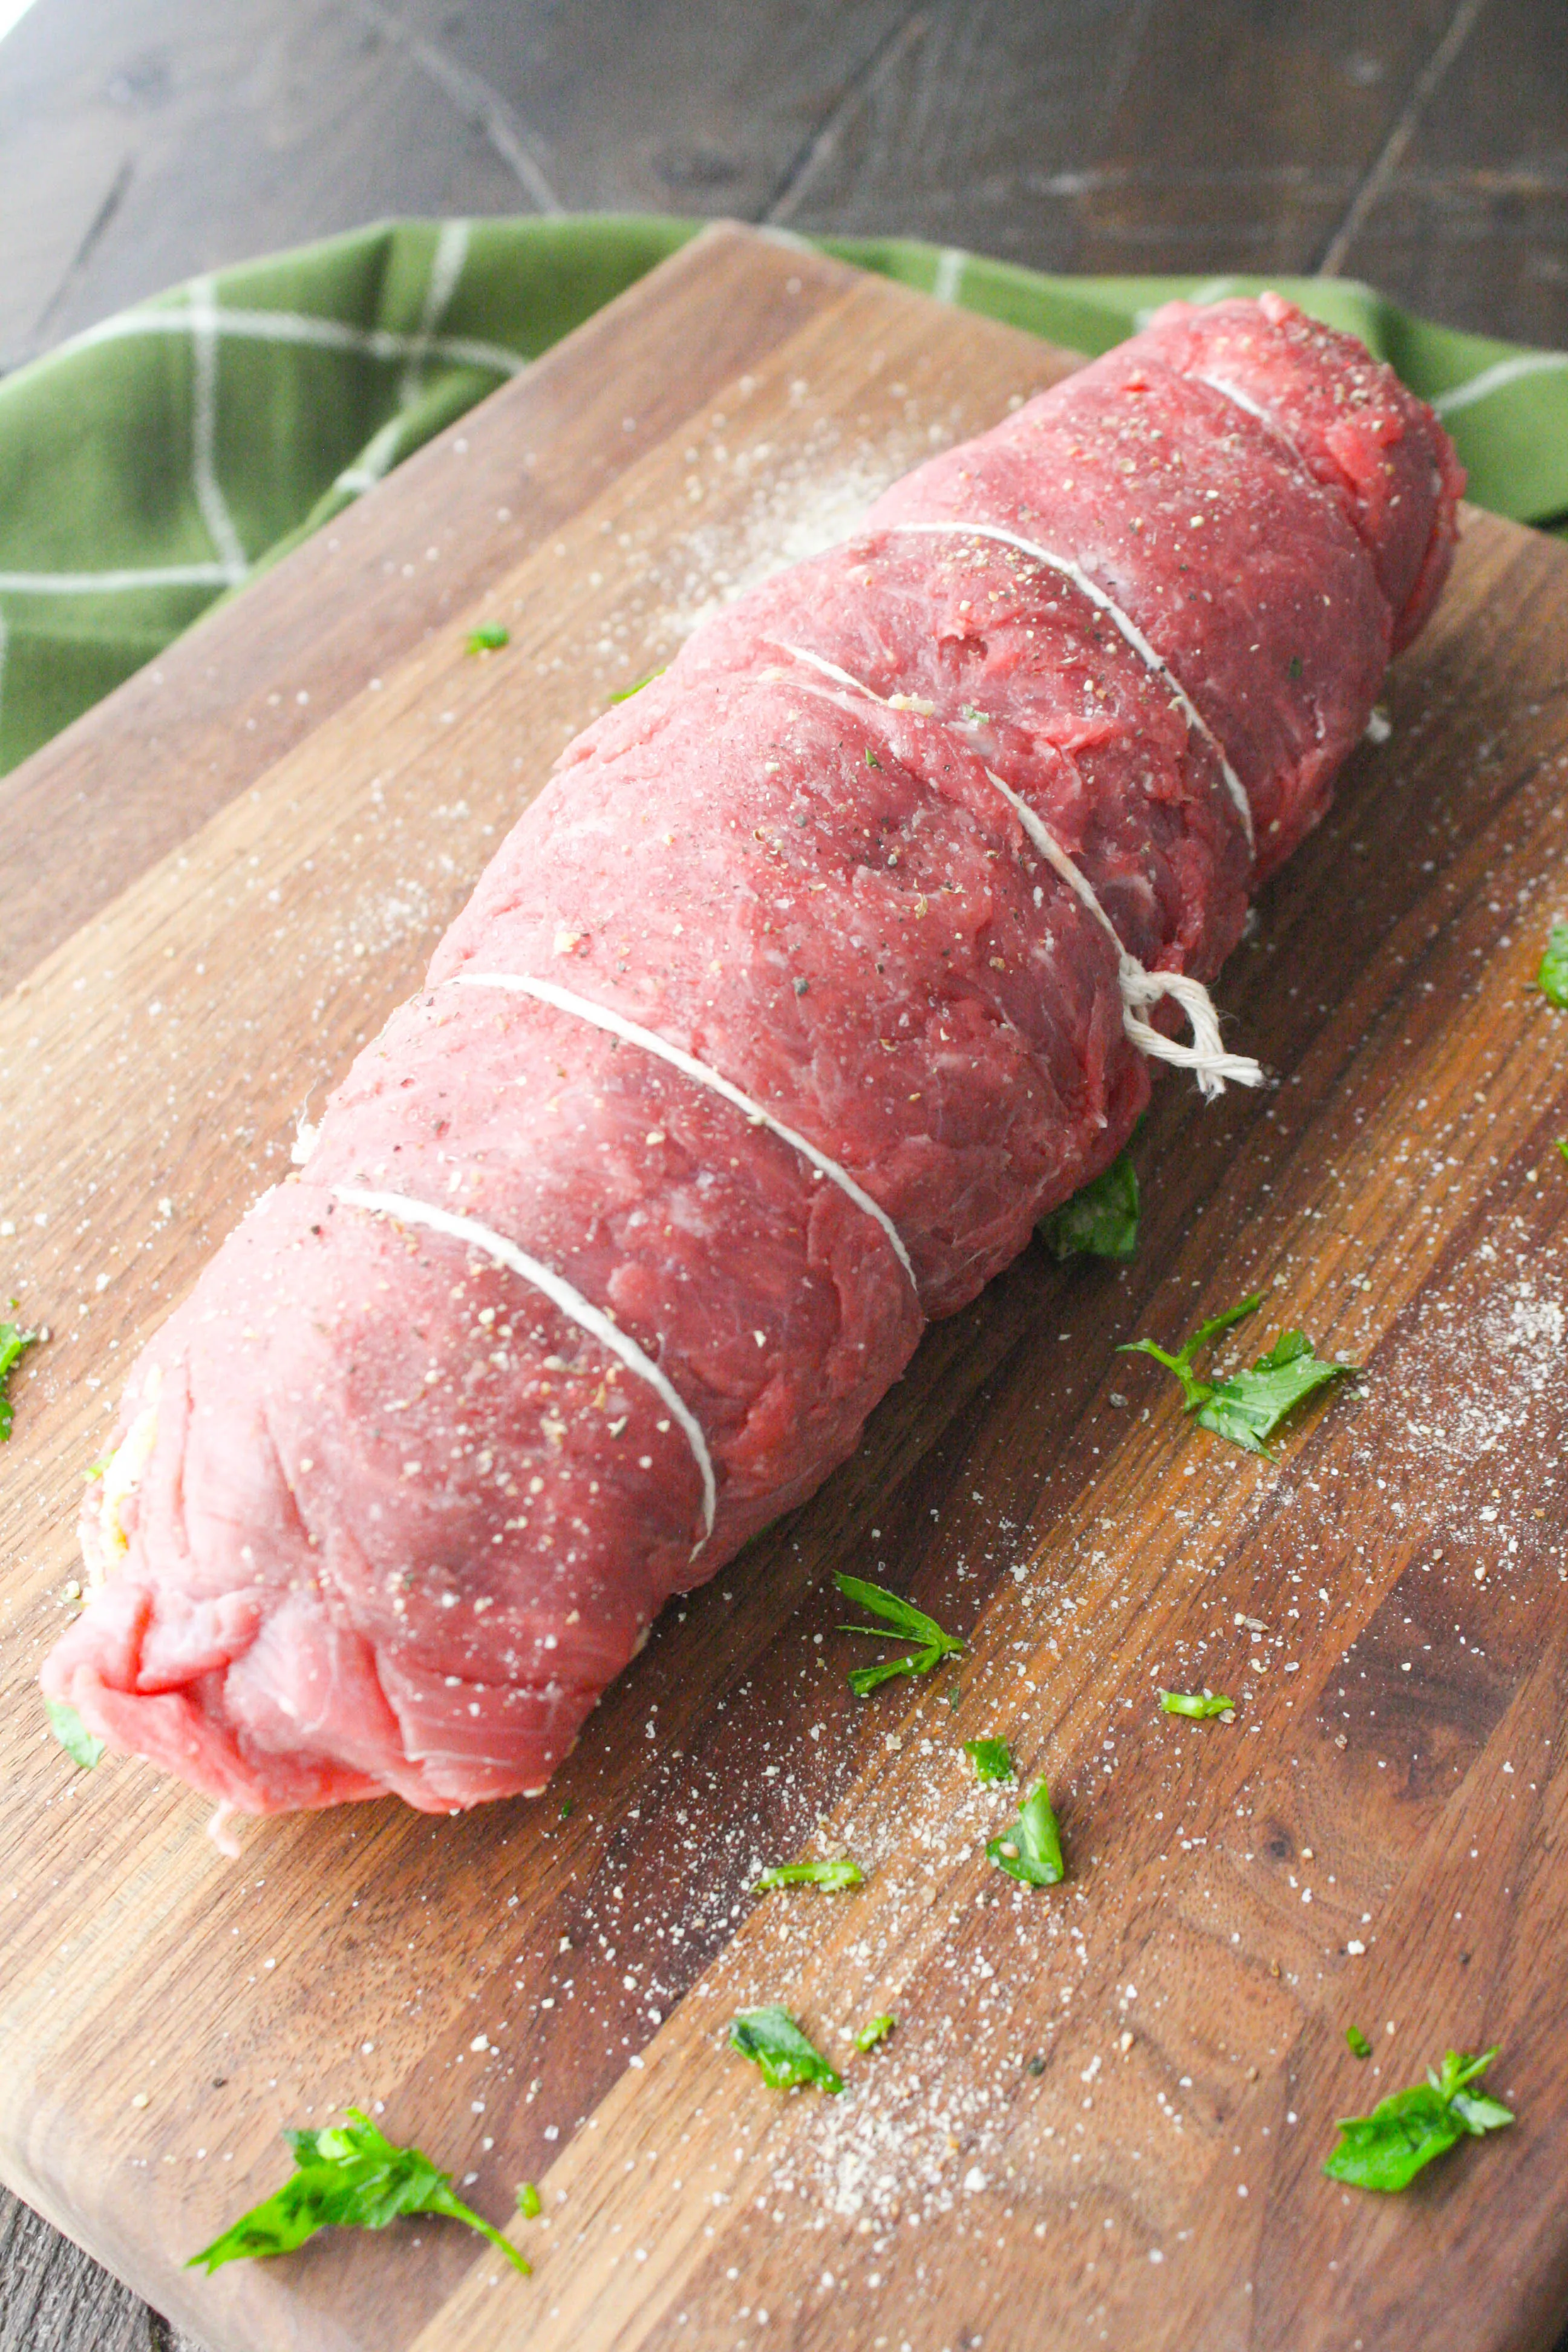 Beef Braciole is easy to make but takes a bit of time to cook. Beef Braciole is perfect for a special meal.